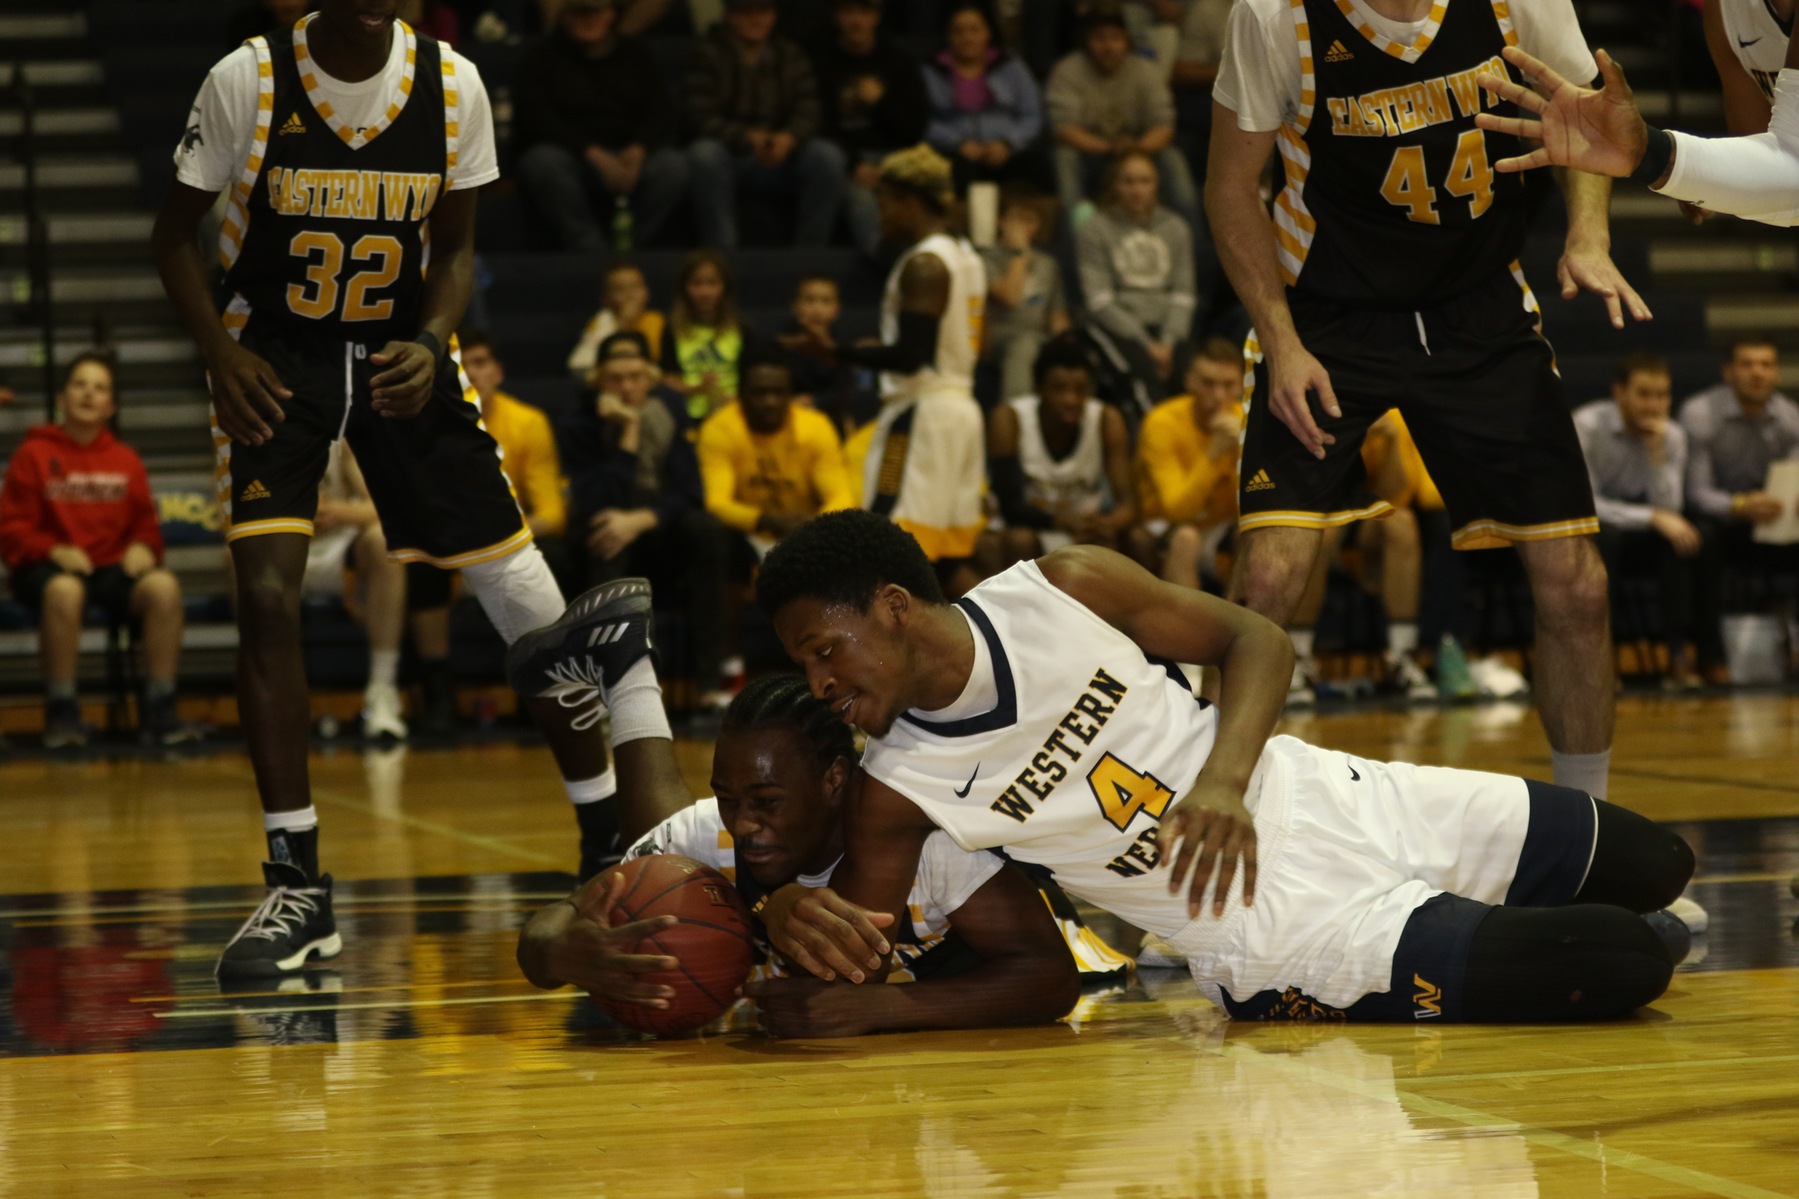 WNCC tops Lancers in high-scoring affair, Cougars nail 22 treys in 129-111 win